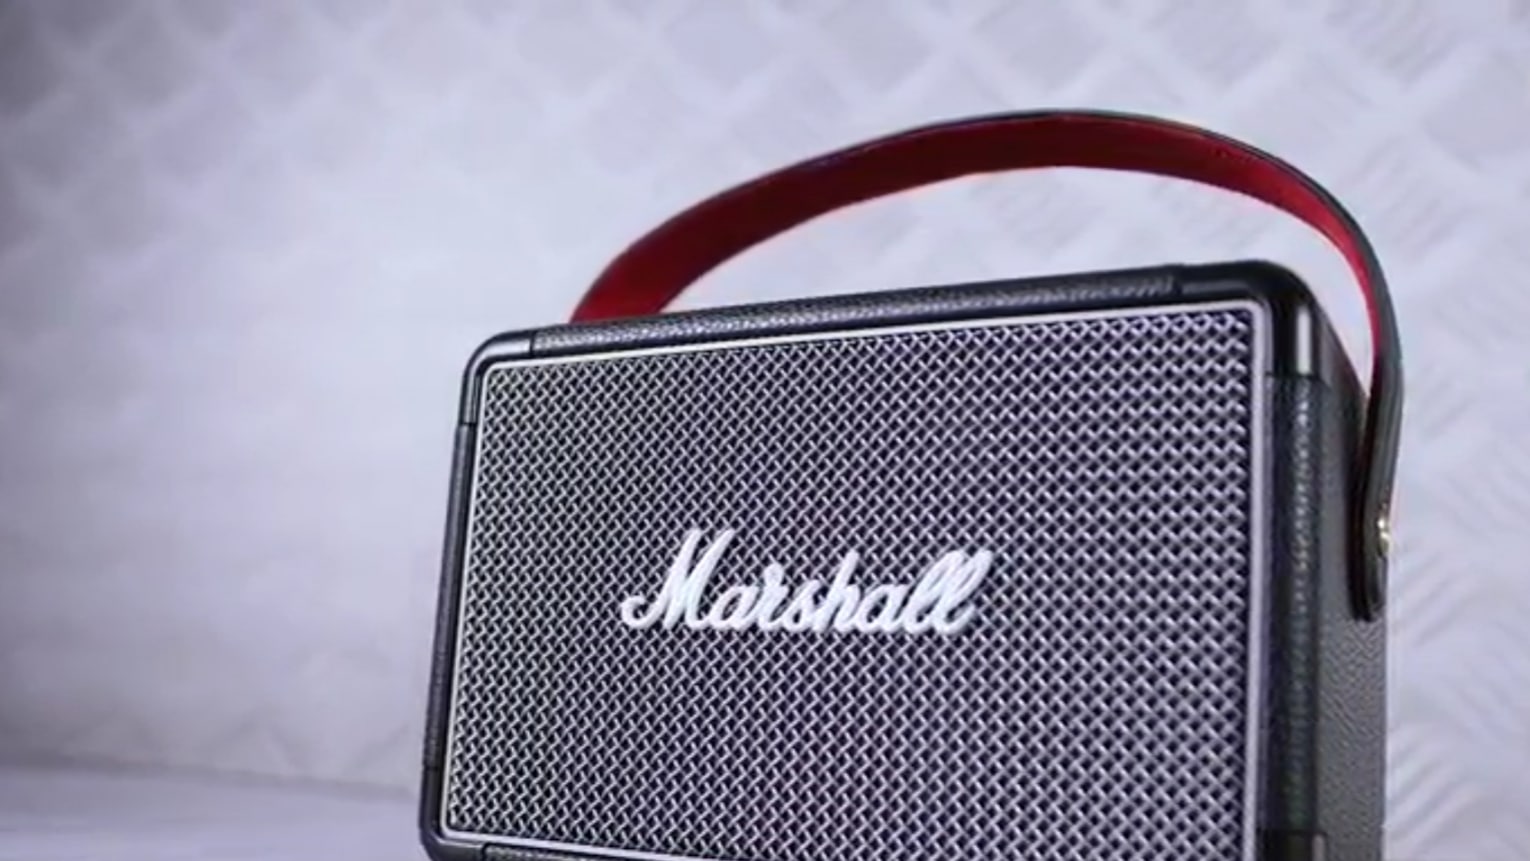 You are currently viewing Marshall Kilburn 2 Bluetooth Speaker Review with Specs